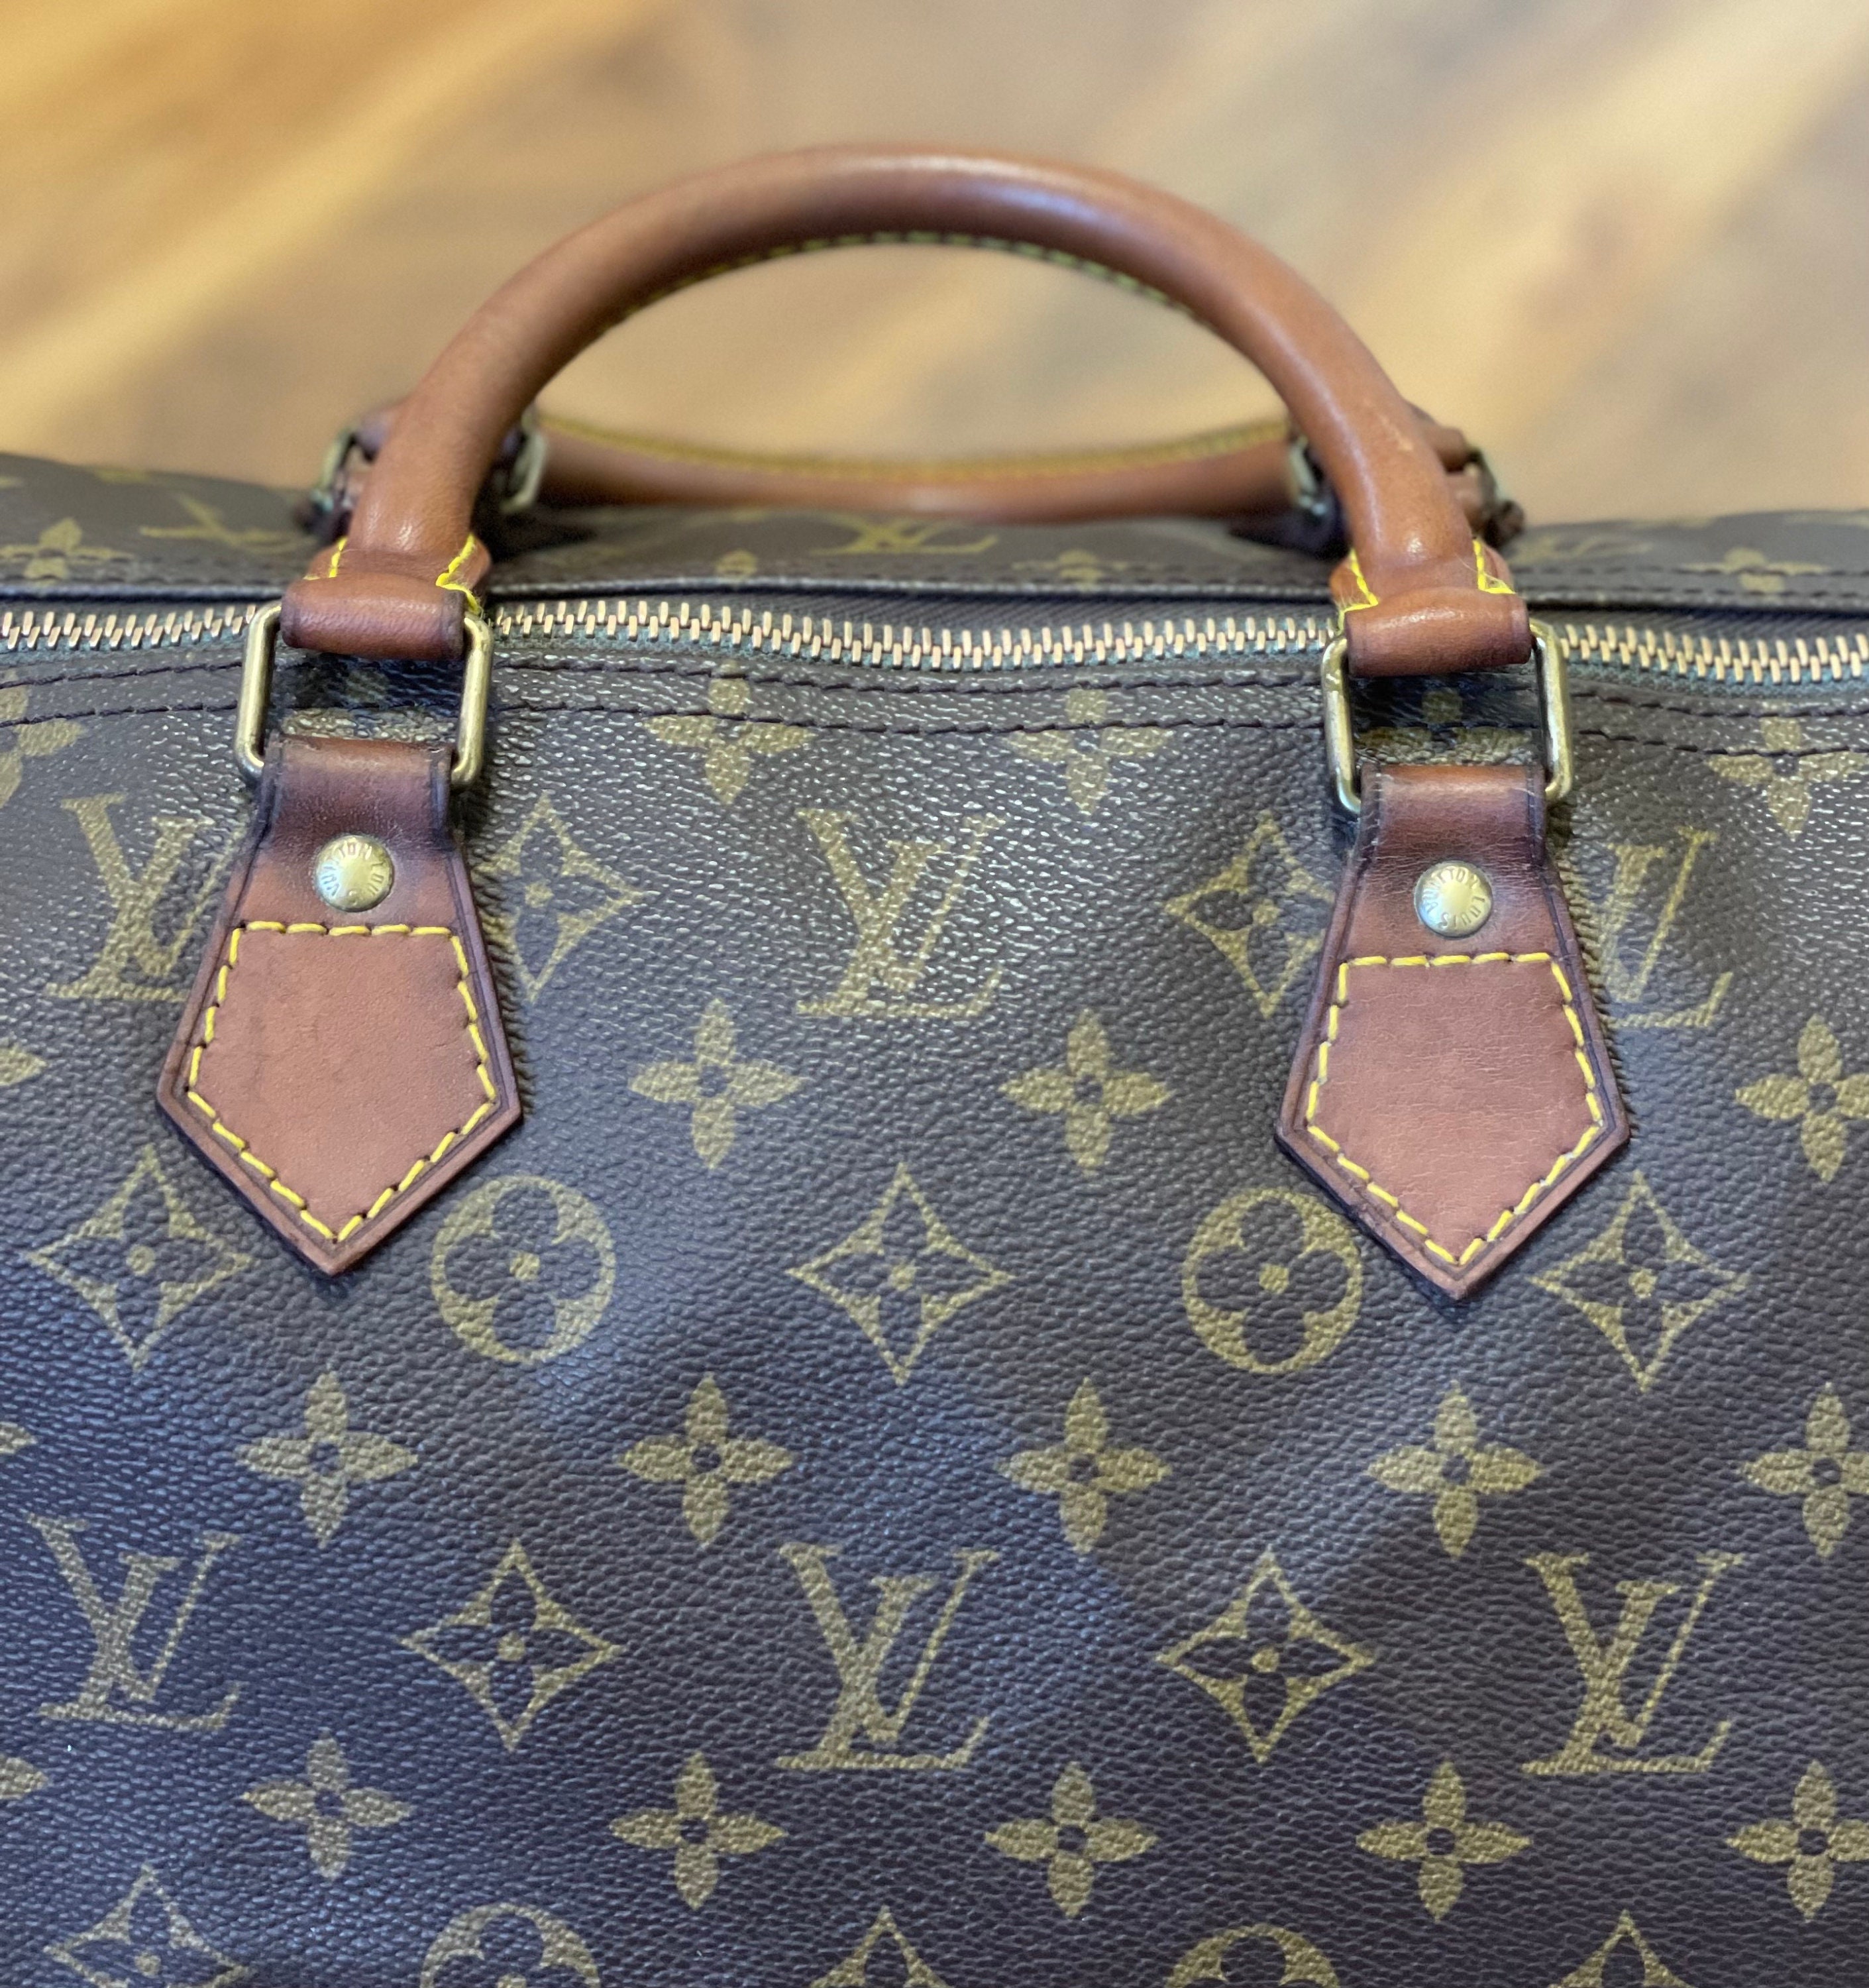 LOUIS VUITTON SPEEDY 40 Vintage Circa February “87 Made in France! Gift  gift